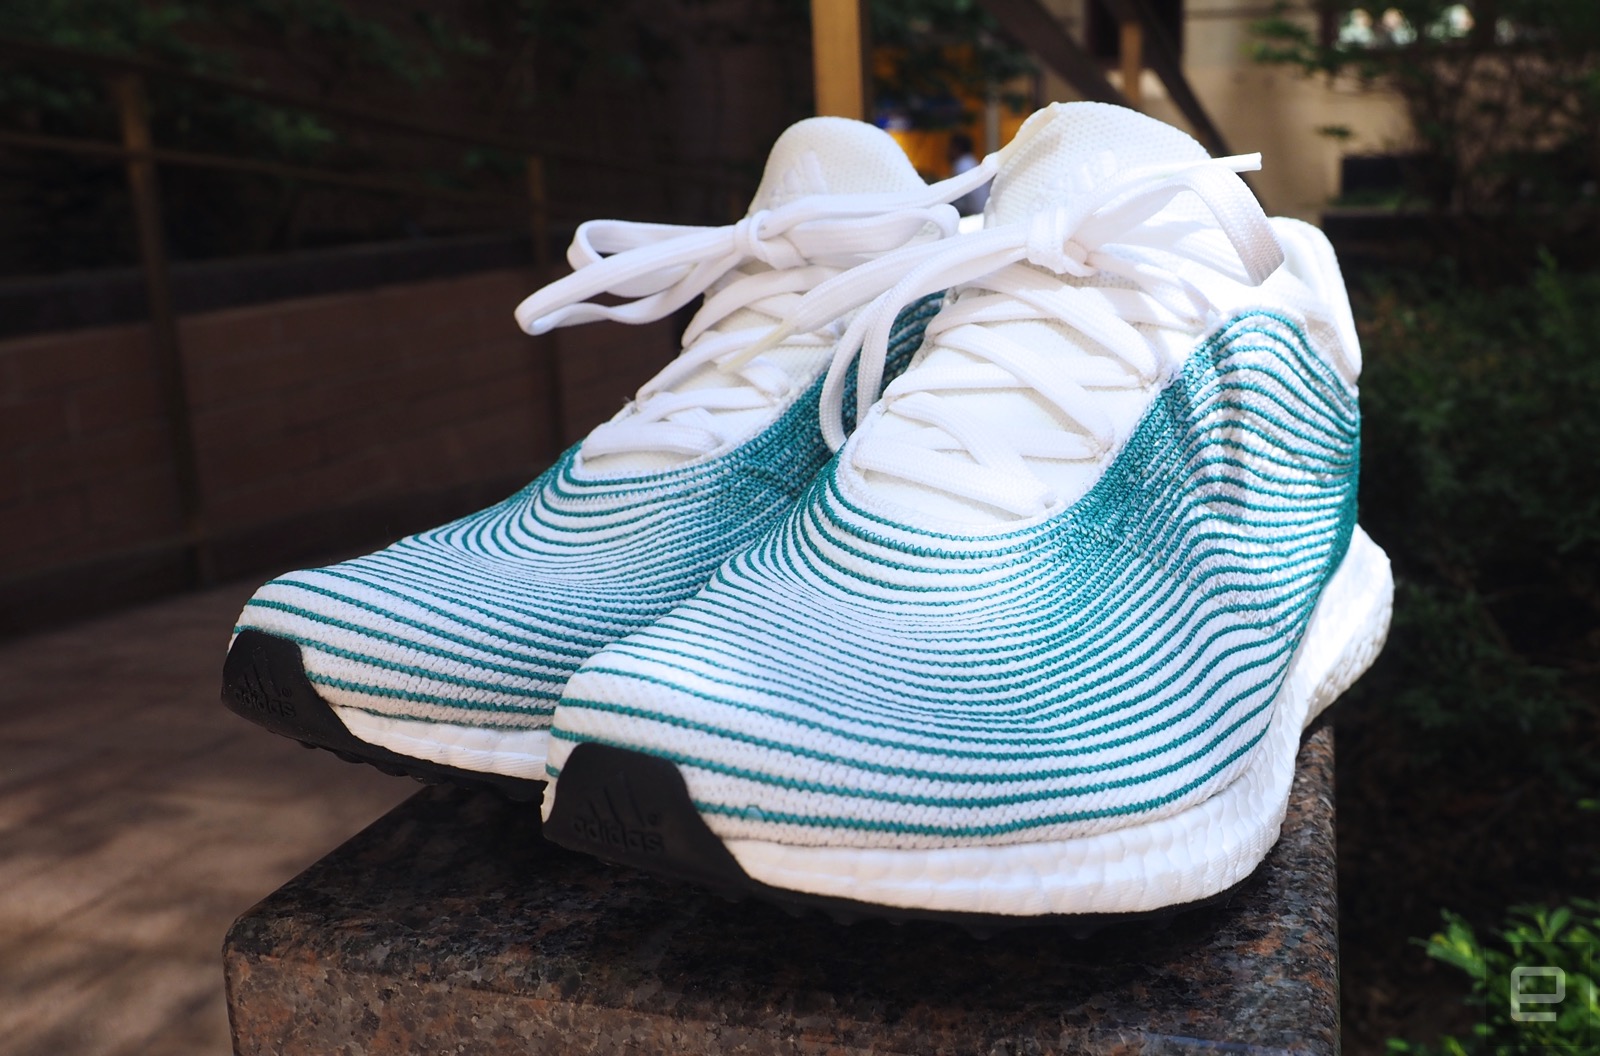 Corrección teléfono habla Adidas gets creative with shoes made from recycled ocean plastic | Engadget